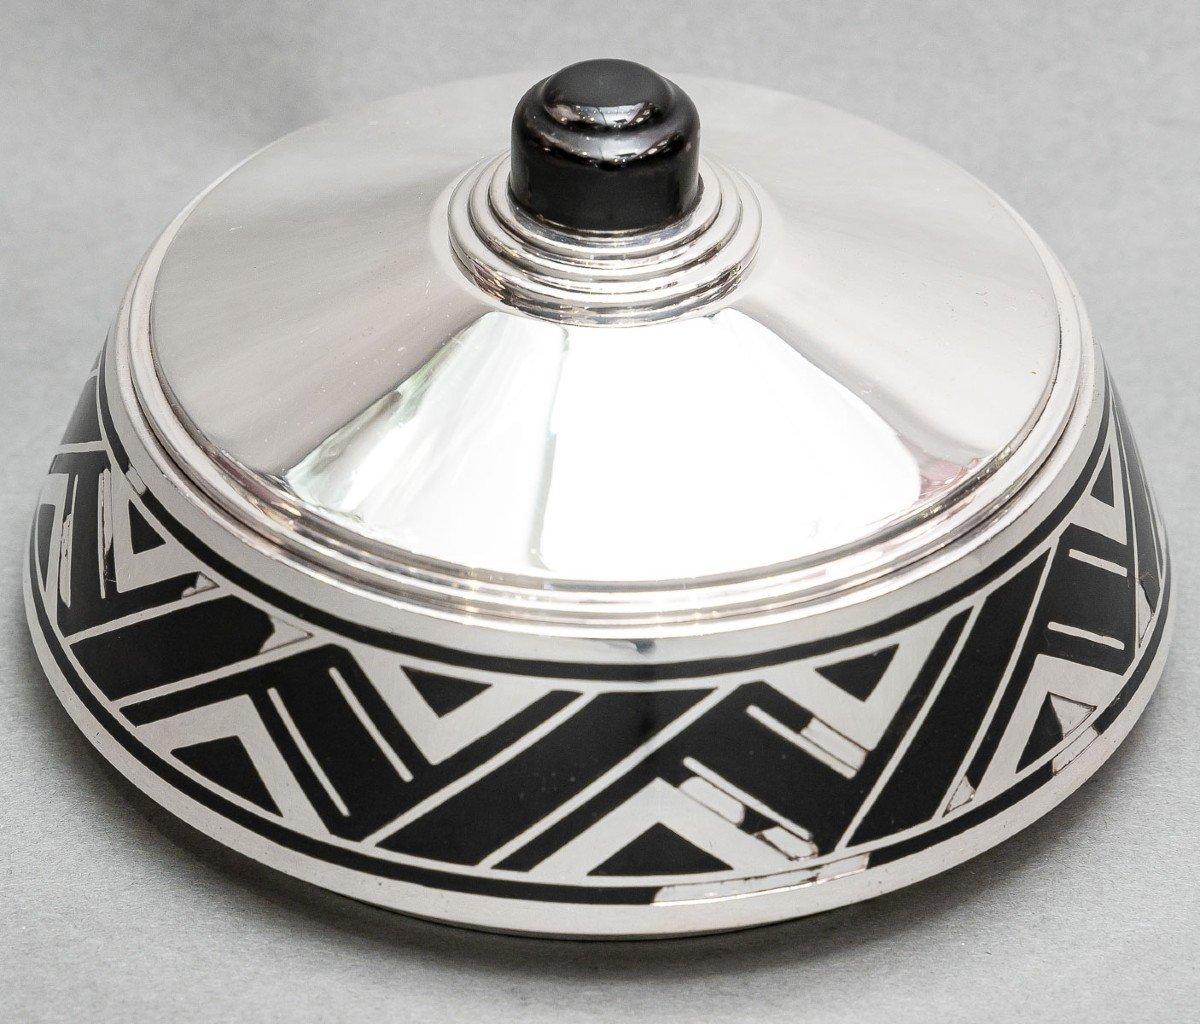 French Silversmith r. Linzeler - box in solid silver and black enamel - art deco period For Sale